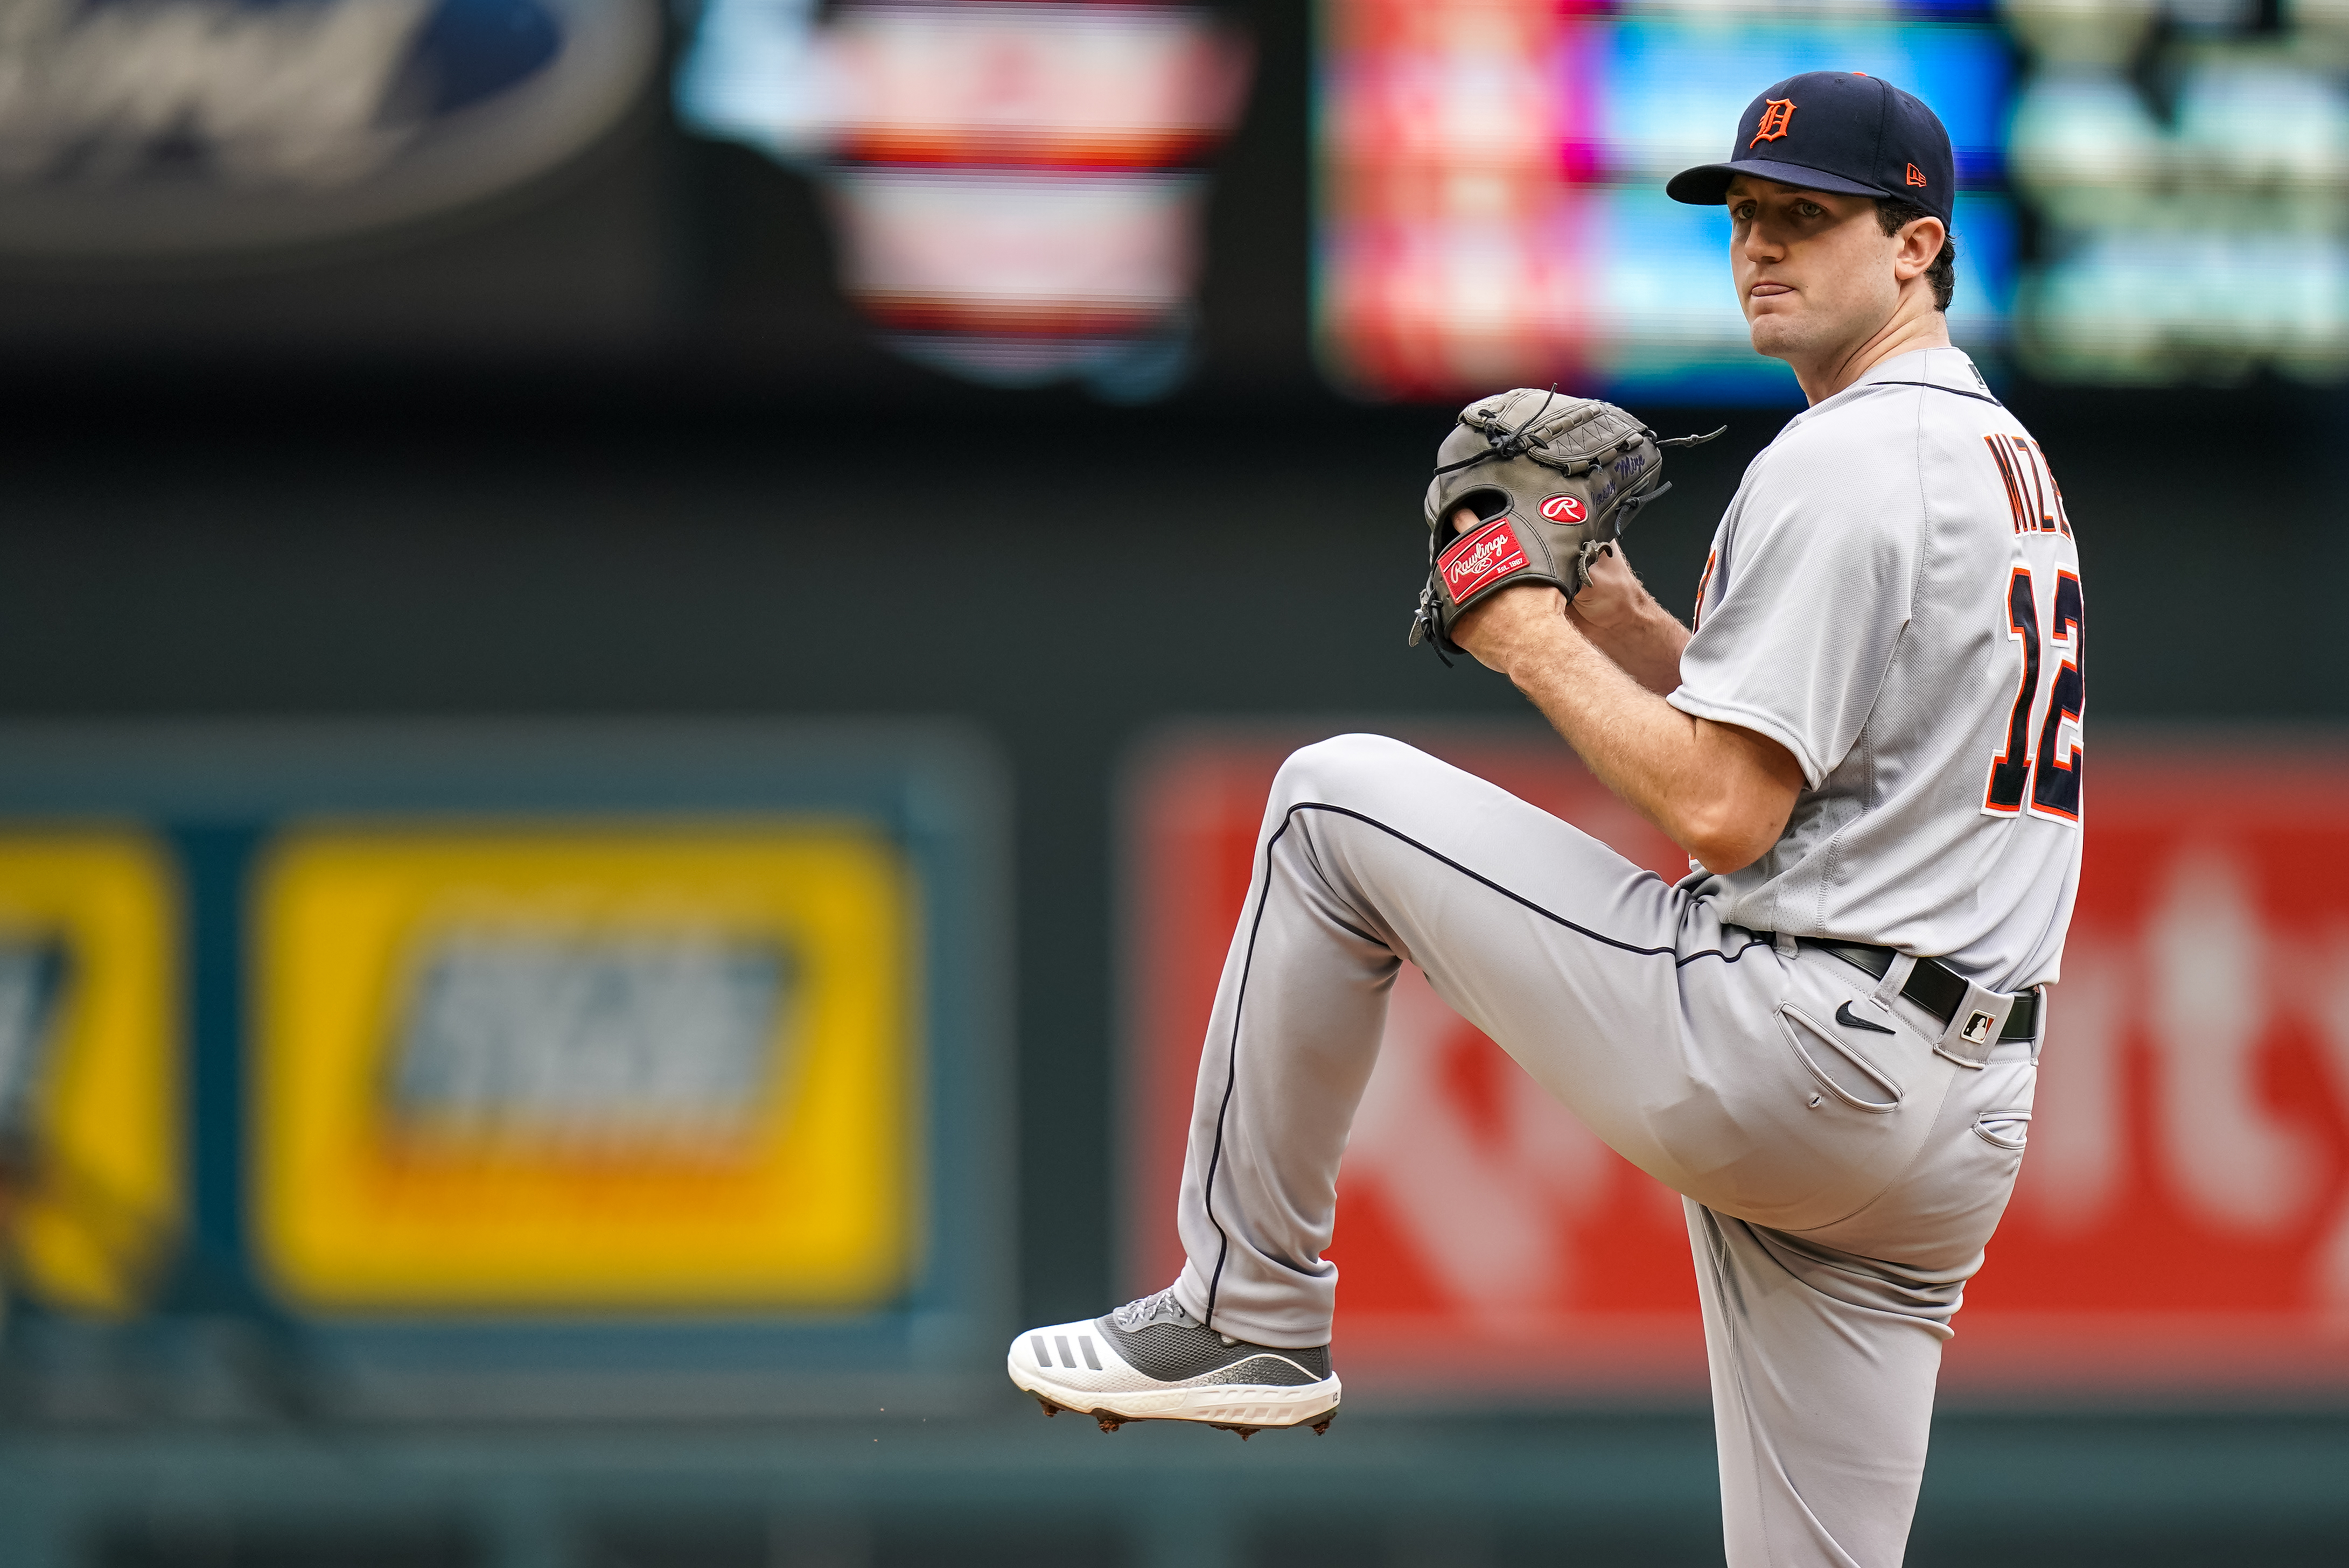 Ranking the 10 current Detroit Tigers players most likely to be part of teams long-term future